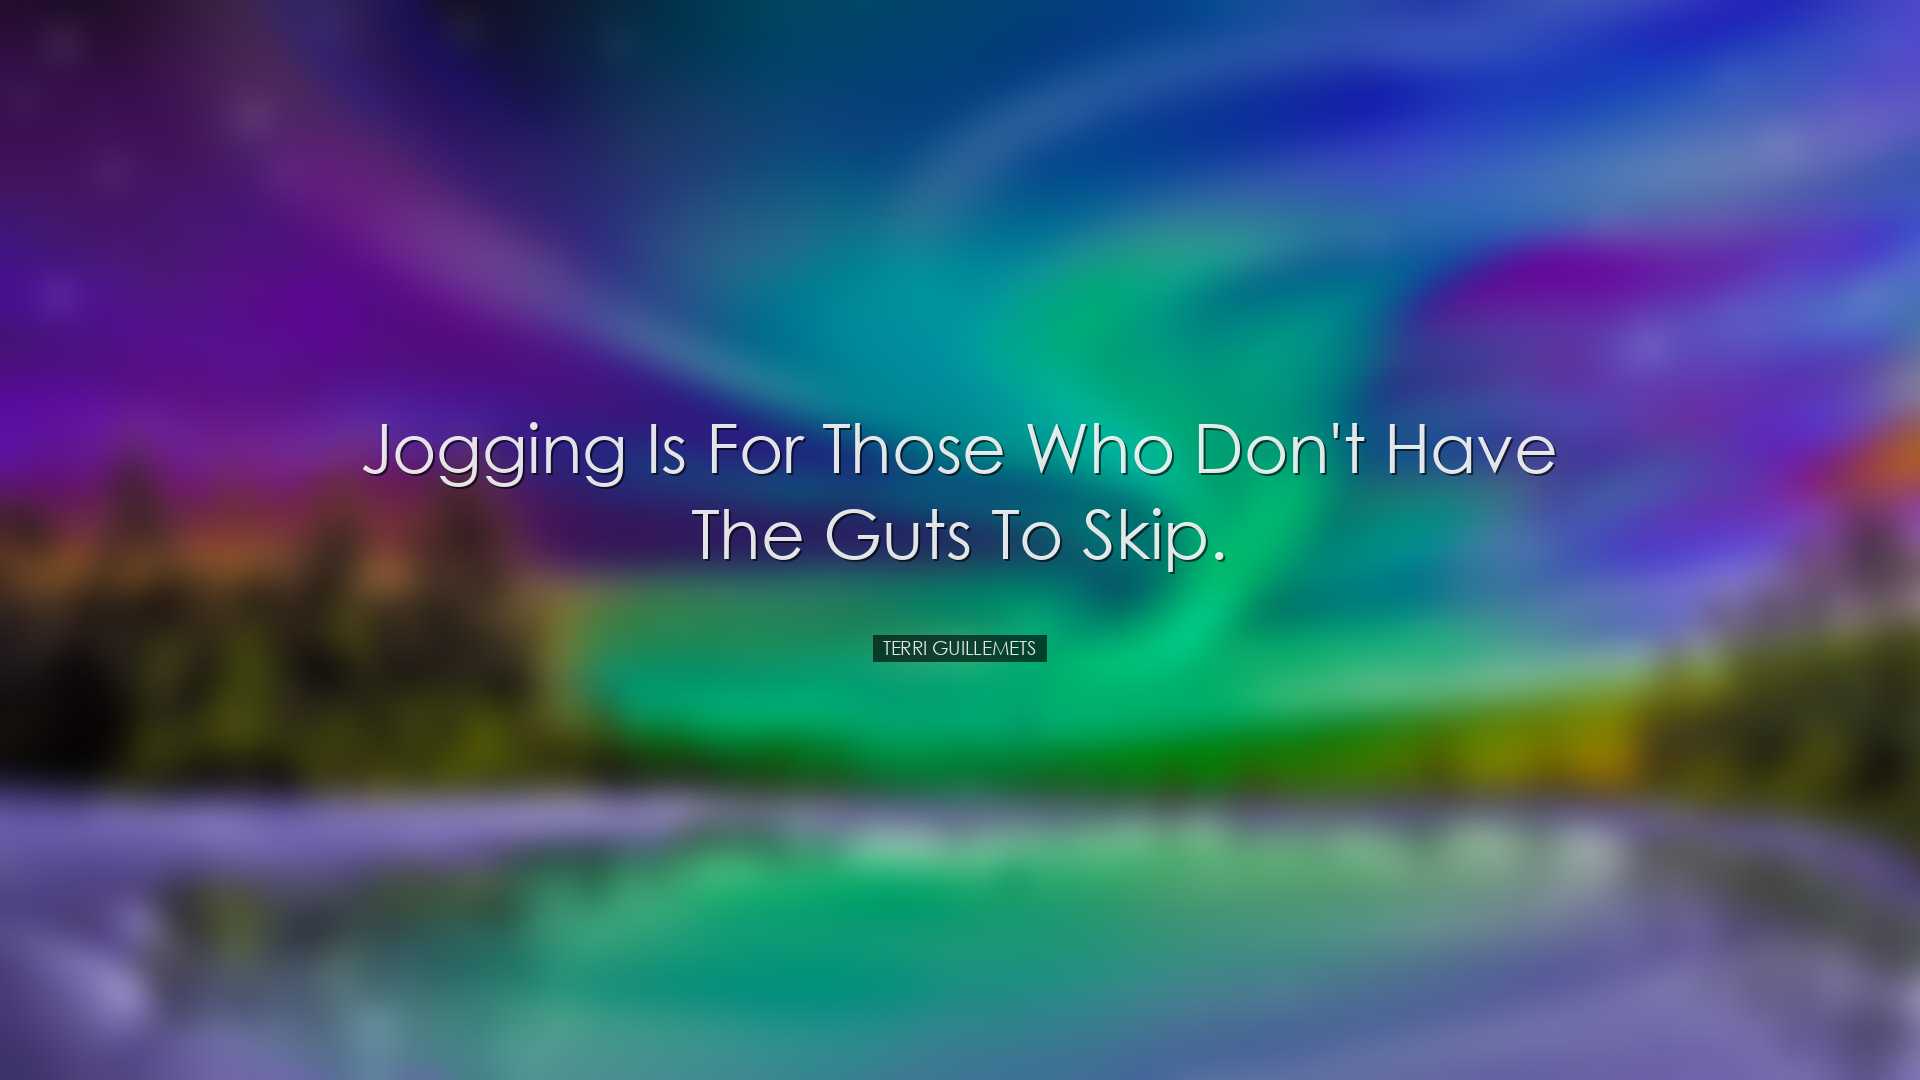 Jogging is for those who don't have the guts to skip. - Terri Guil